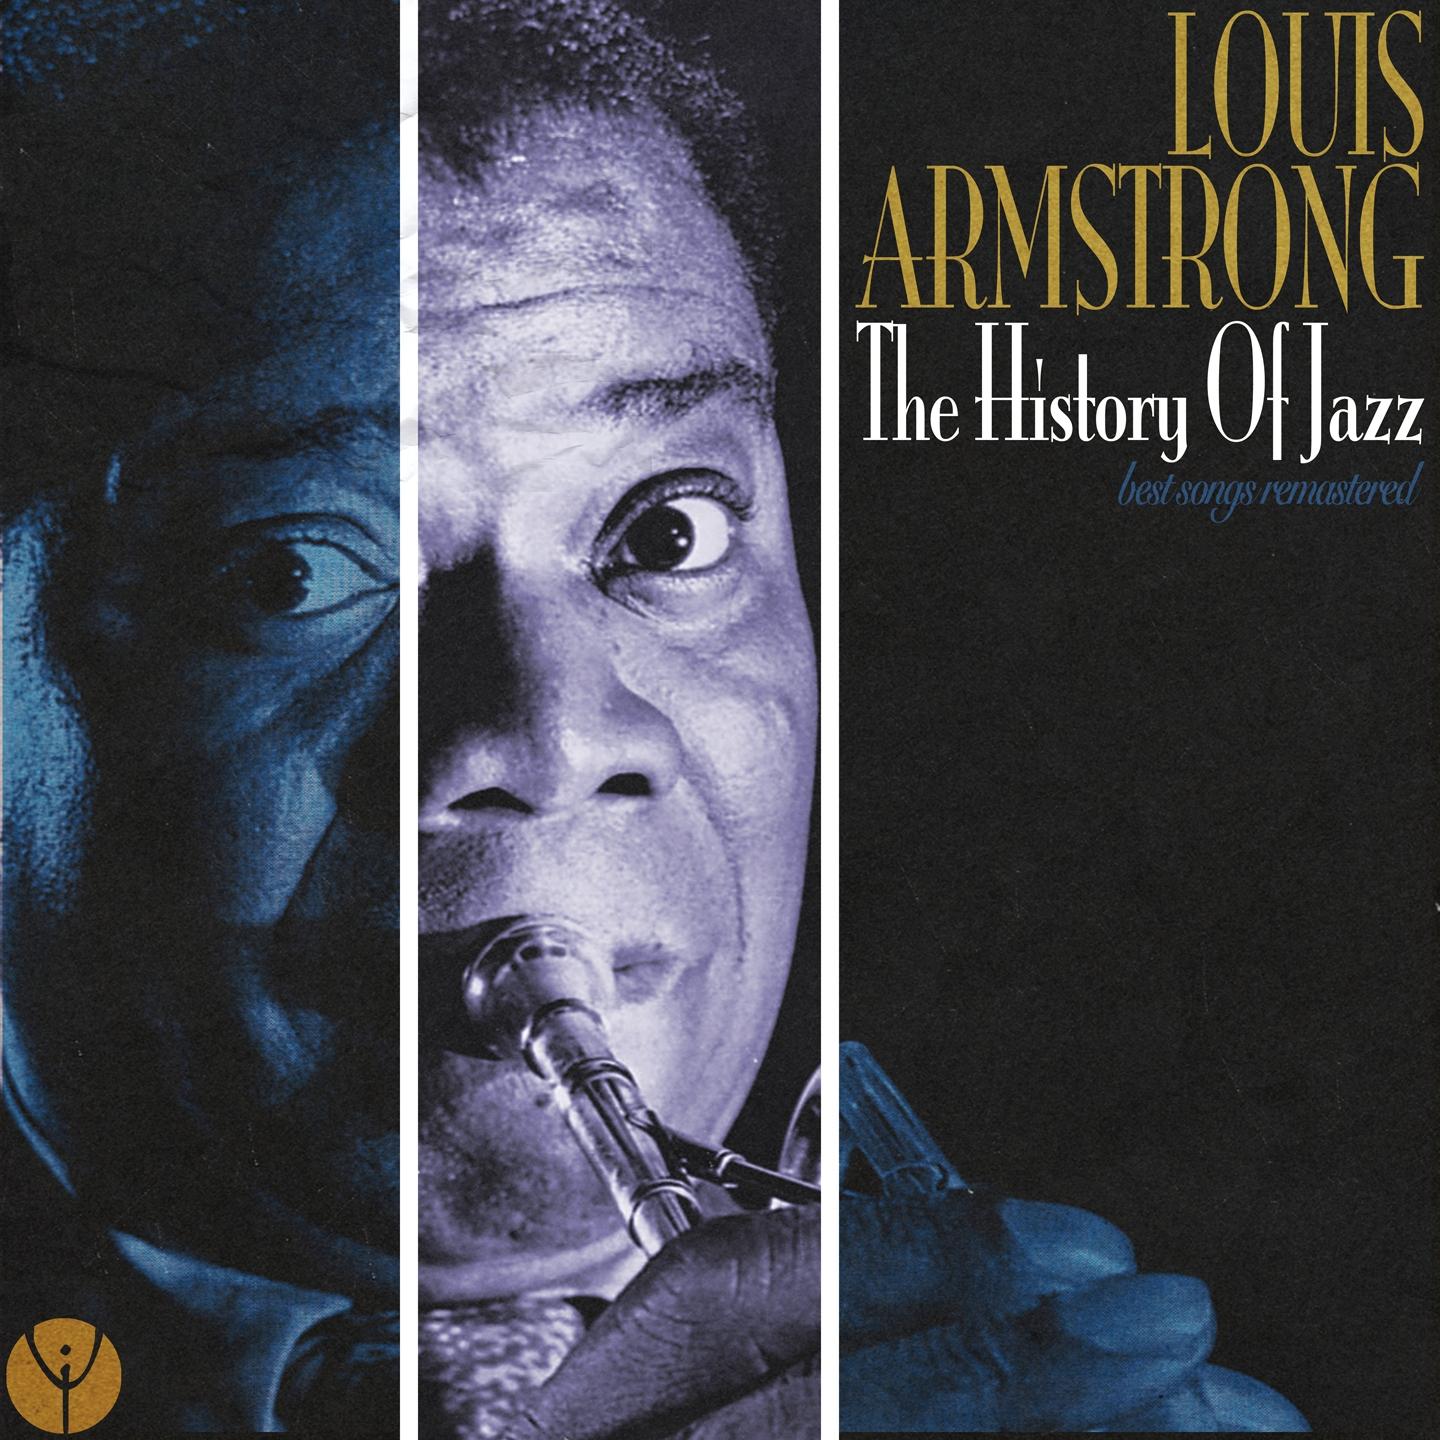 The History of Jazz (Best Songs Remastered)